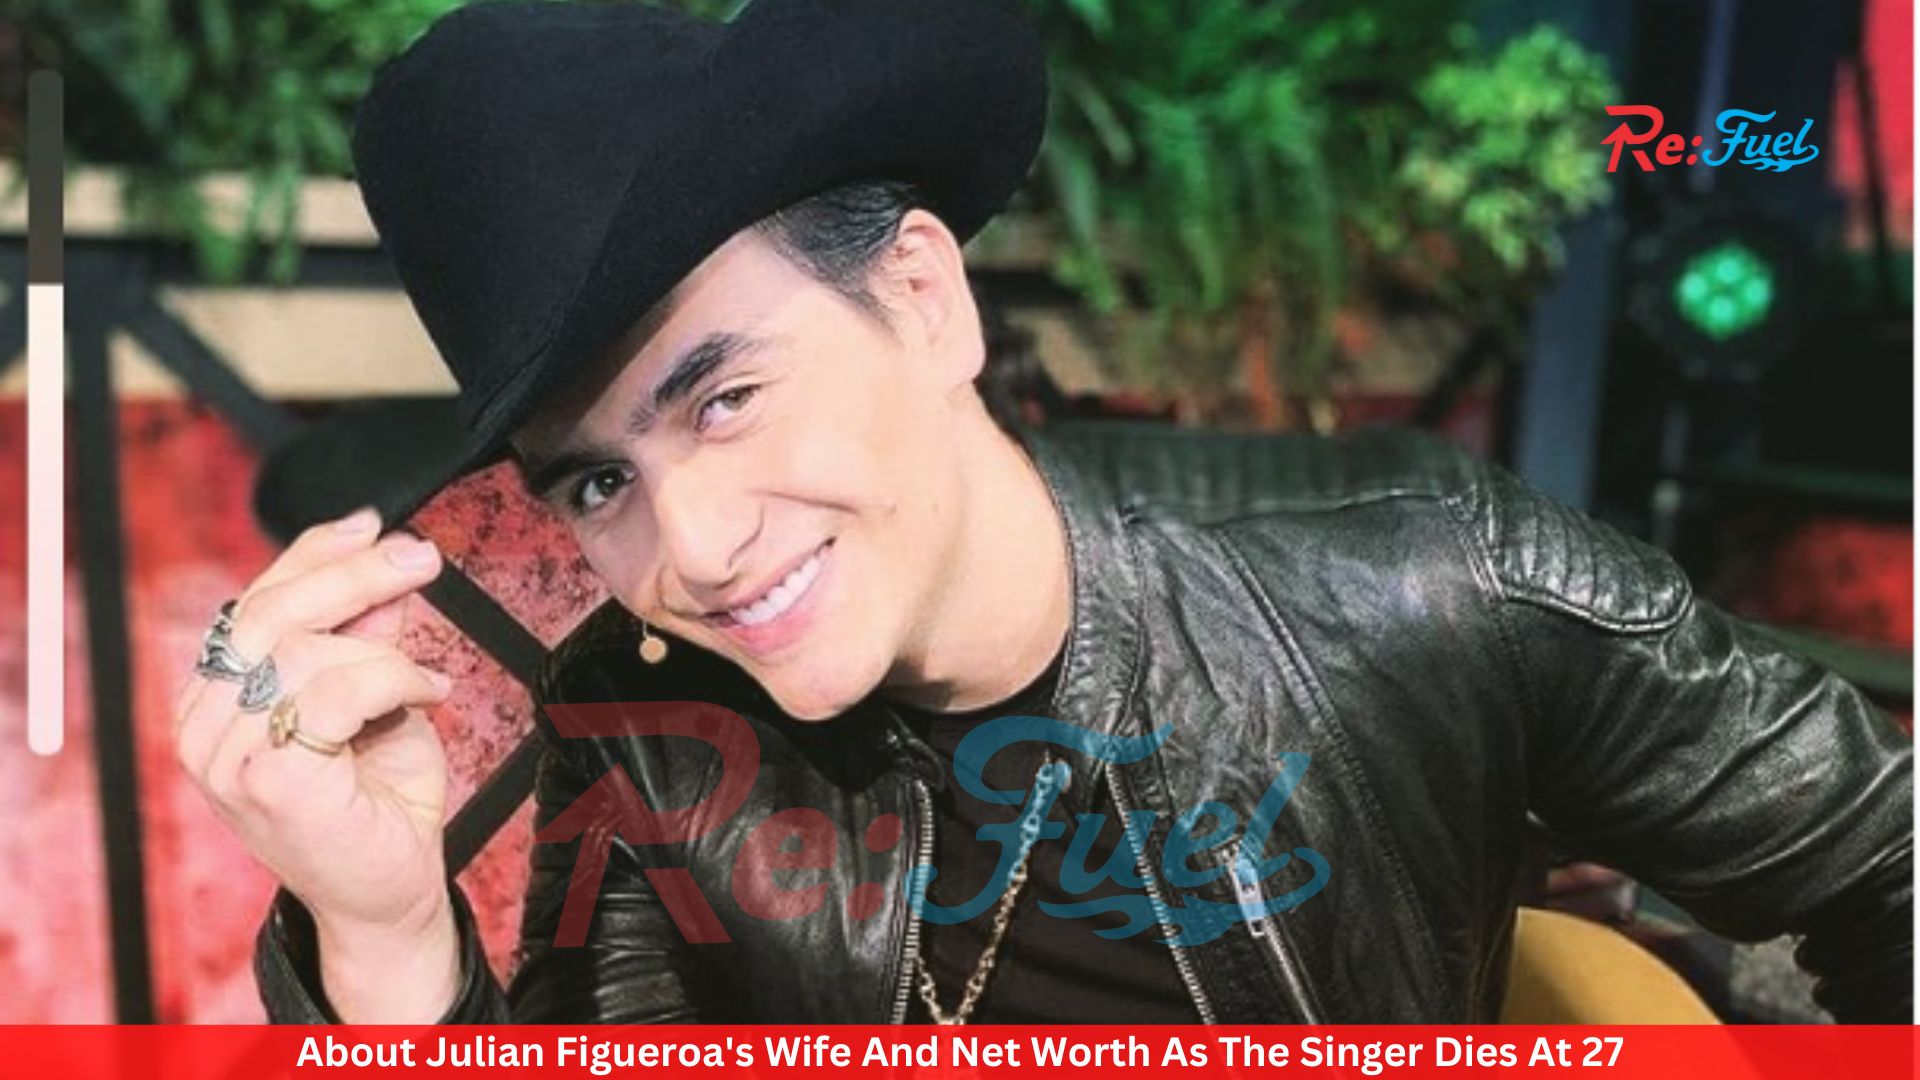 About Julian Figueroa's Wife And Net Worth As The Singer Dies At 27